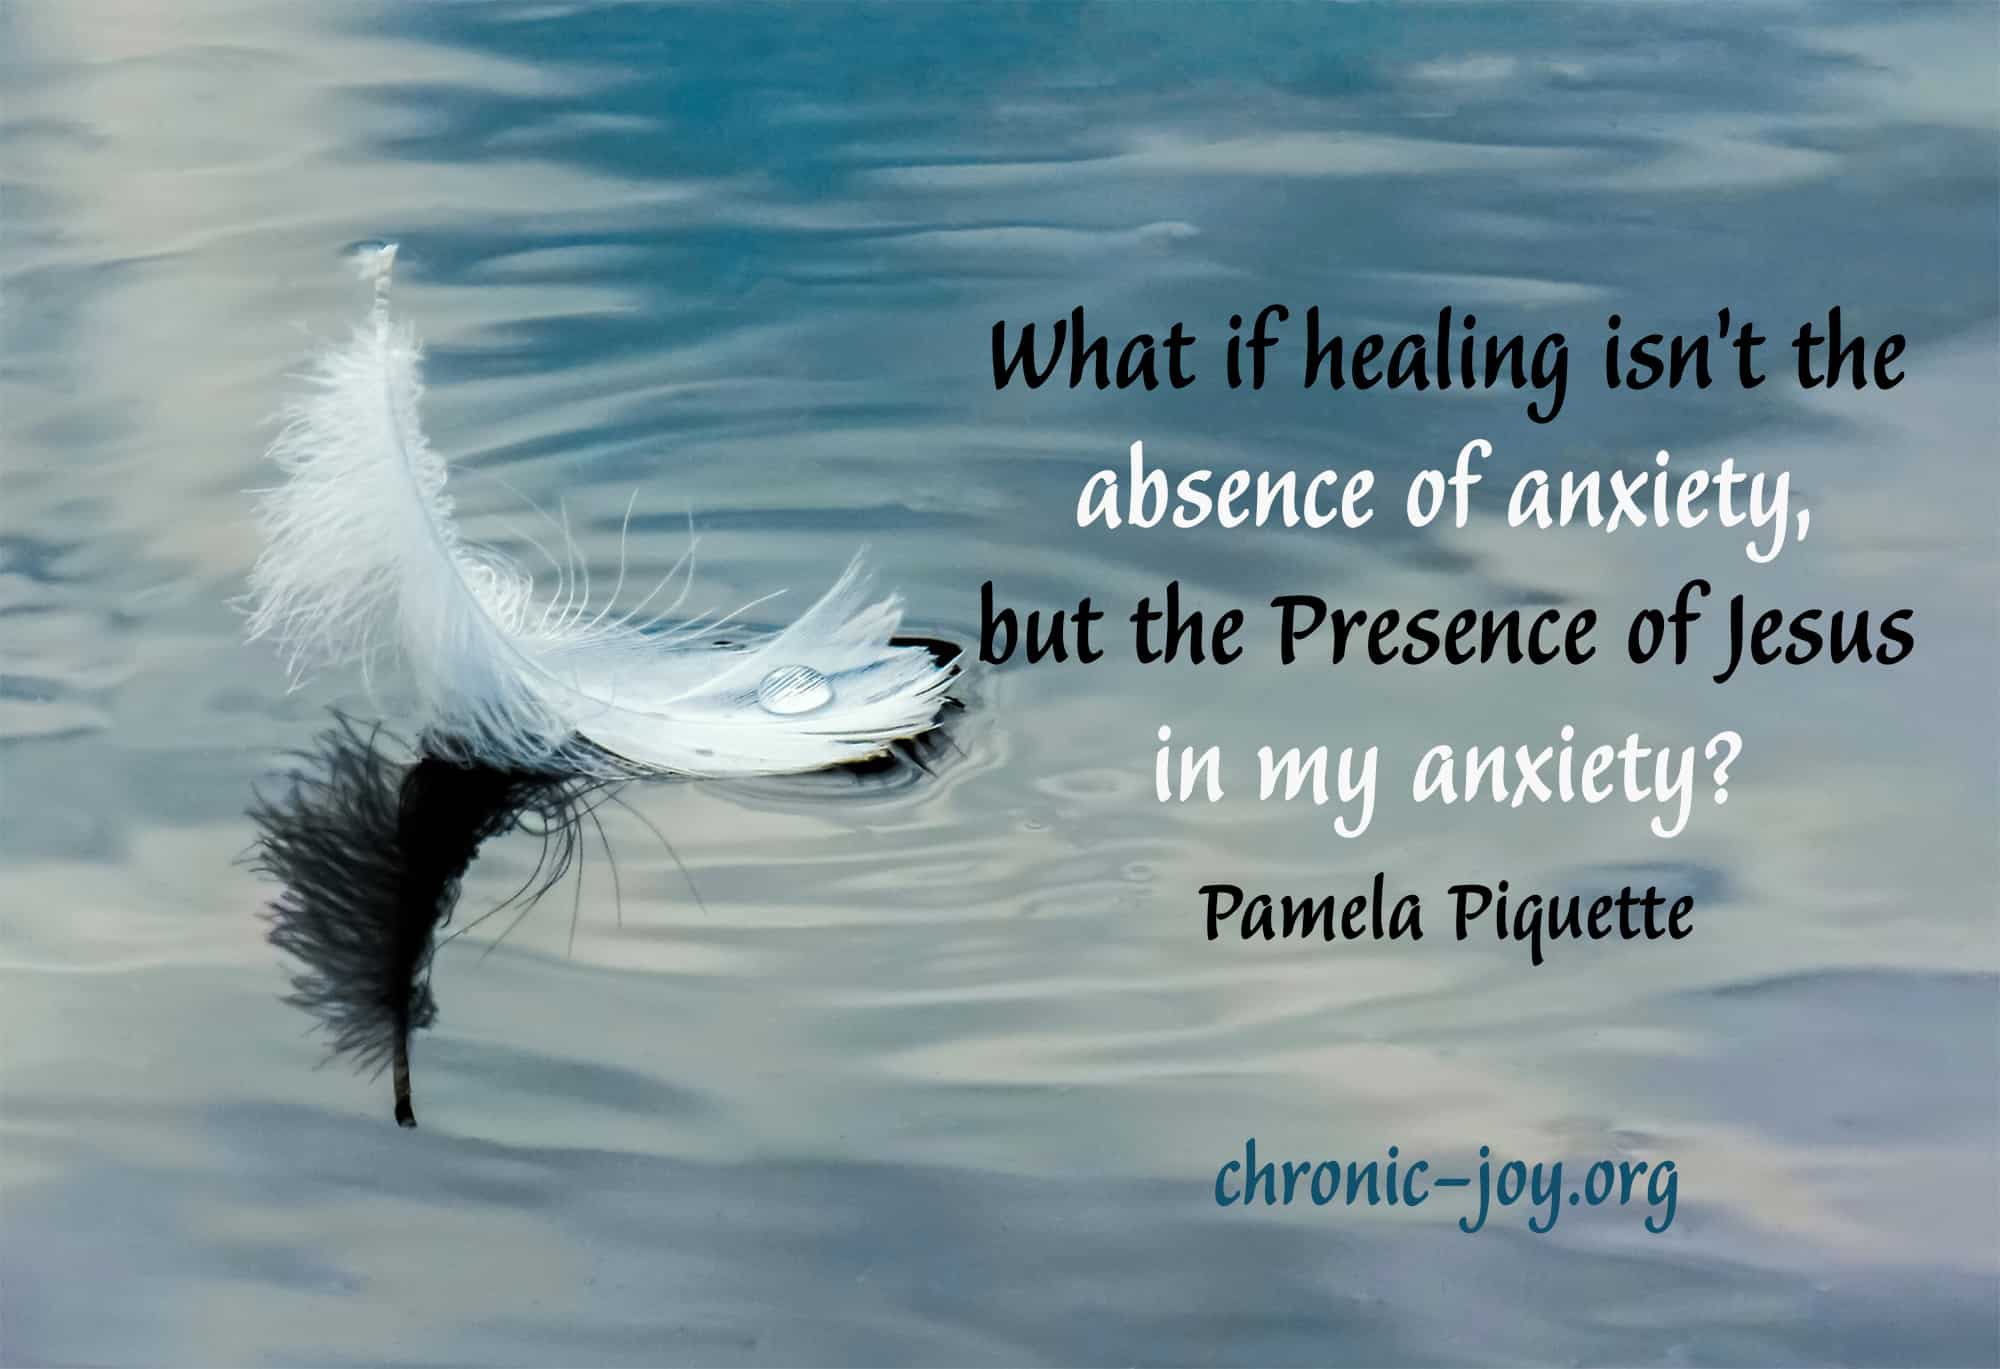 What if healing isn’t the absence of anxiety, but the Presence of Jesus in my anxiety? ~ Pamela Piquette